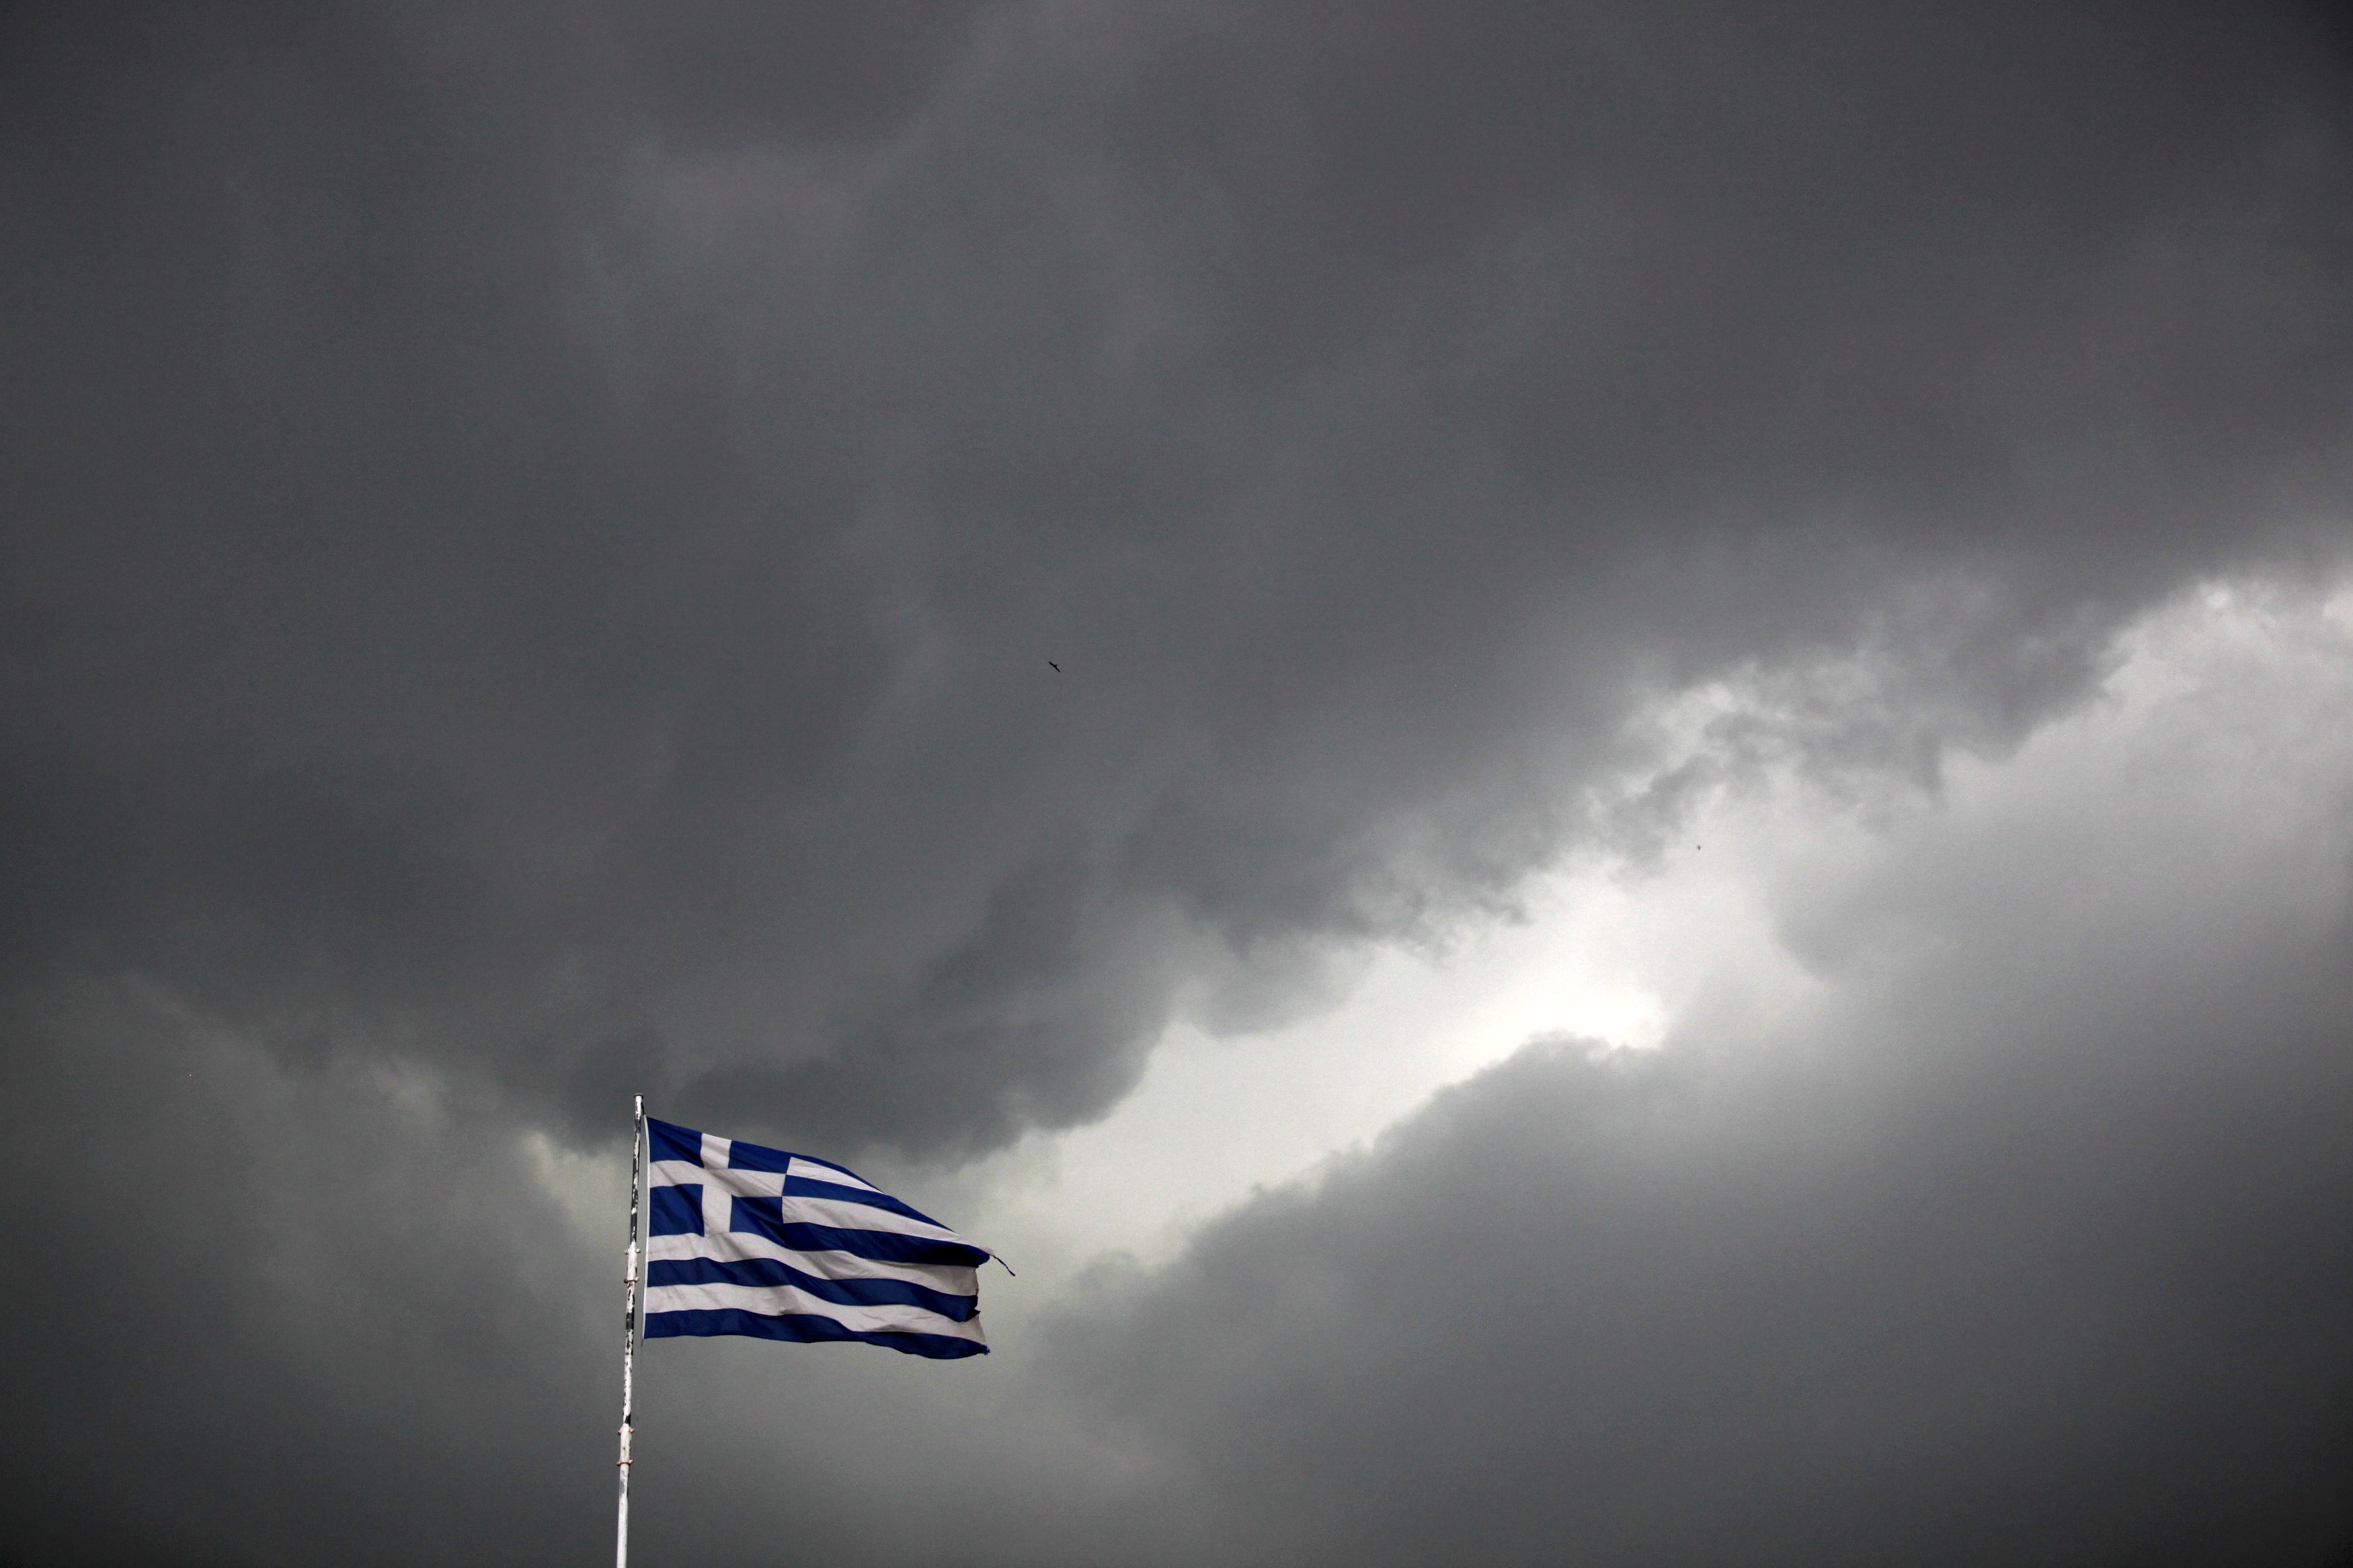 A Greek national flag flutters atop a building as dark clouds fill the sky in Athens on June 30, 2015.